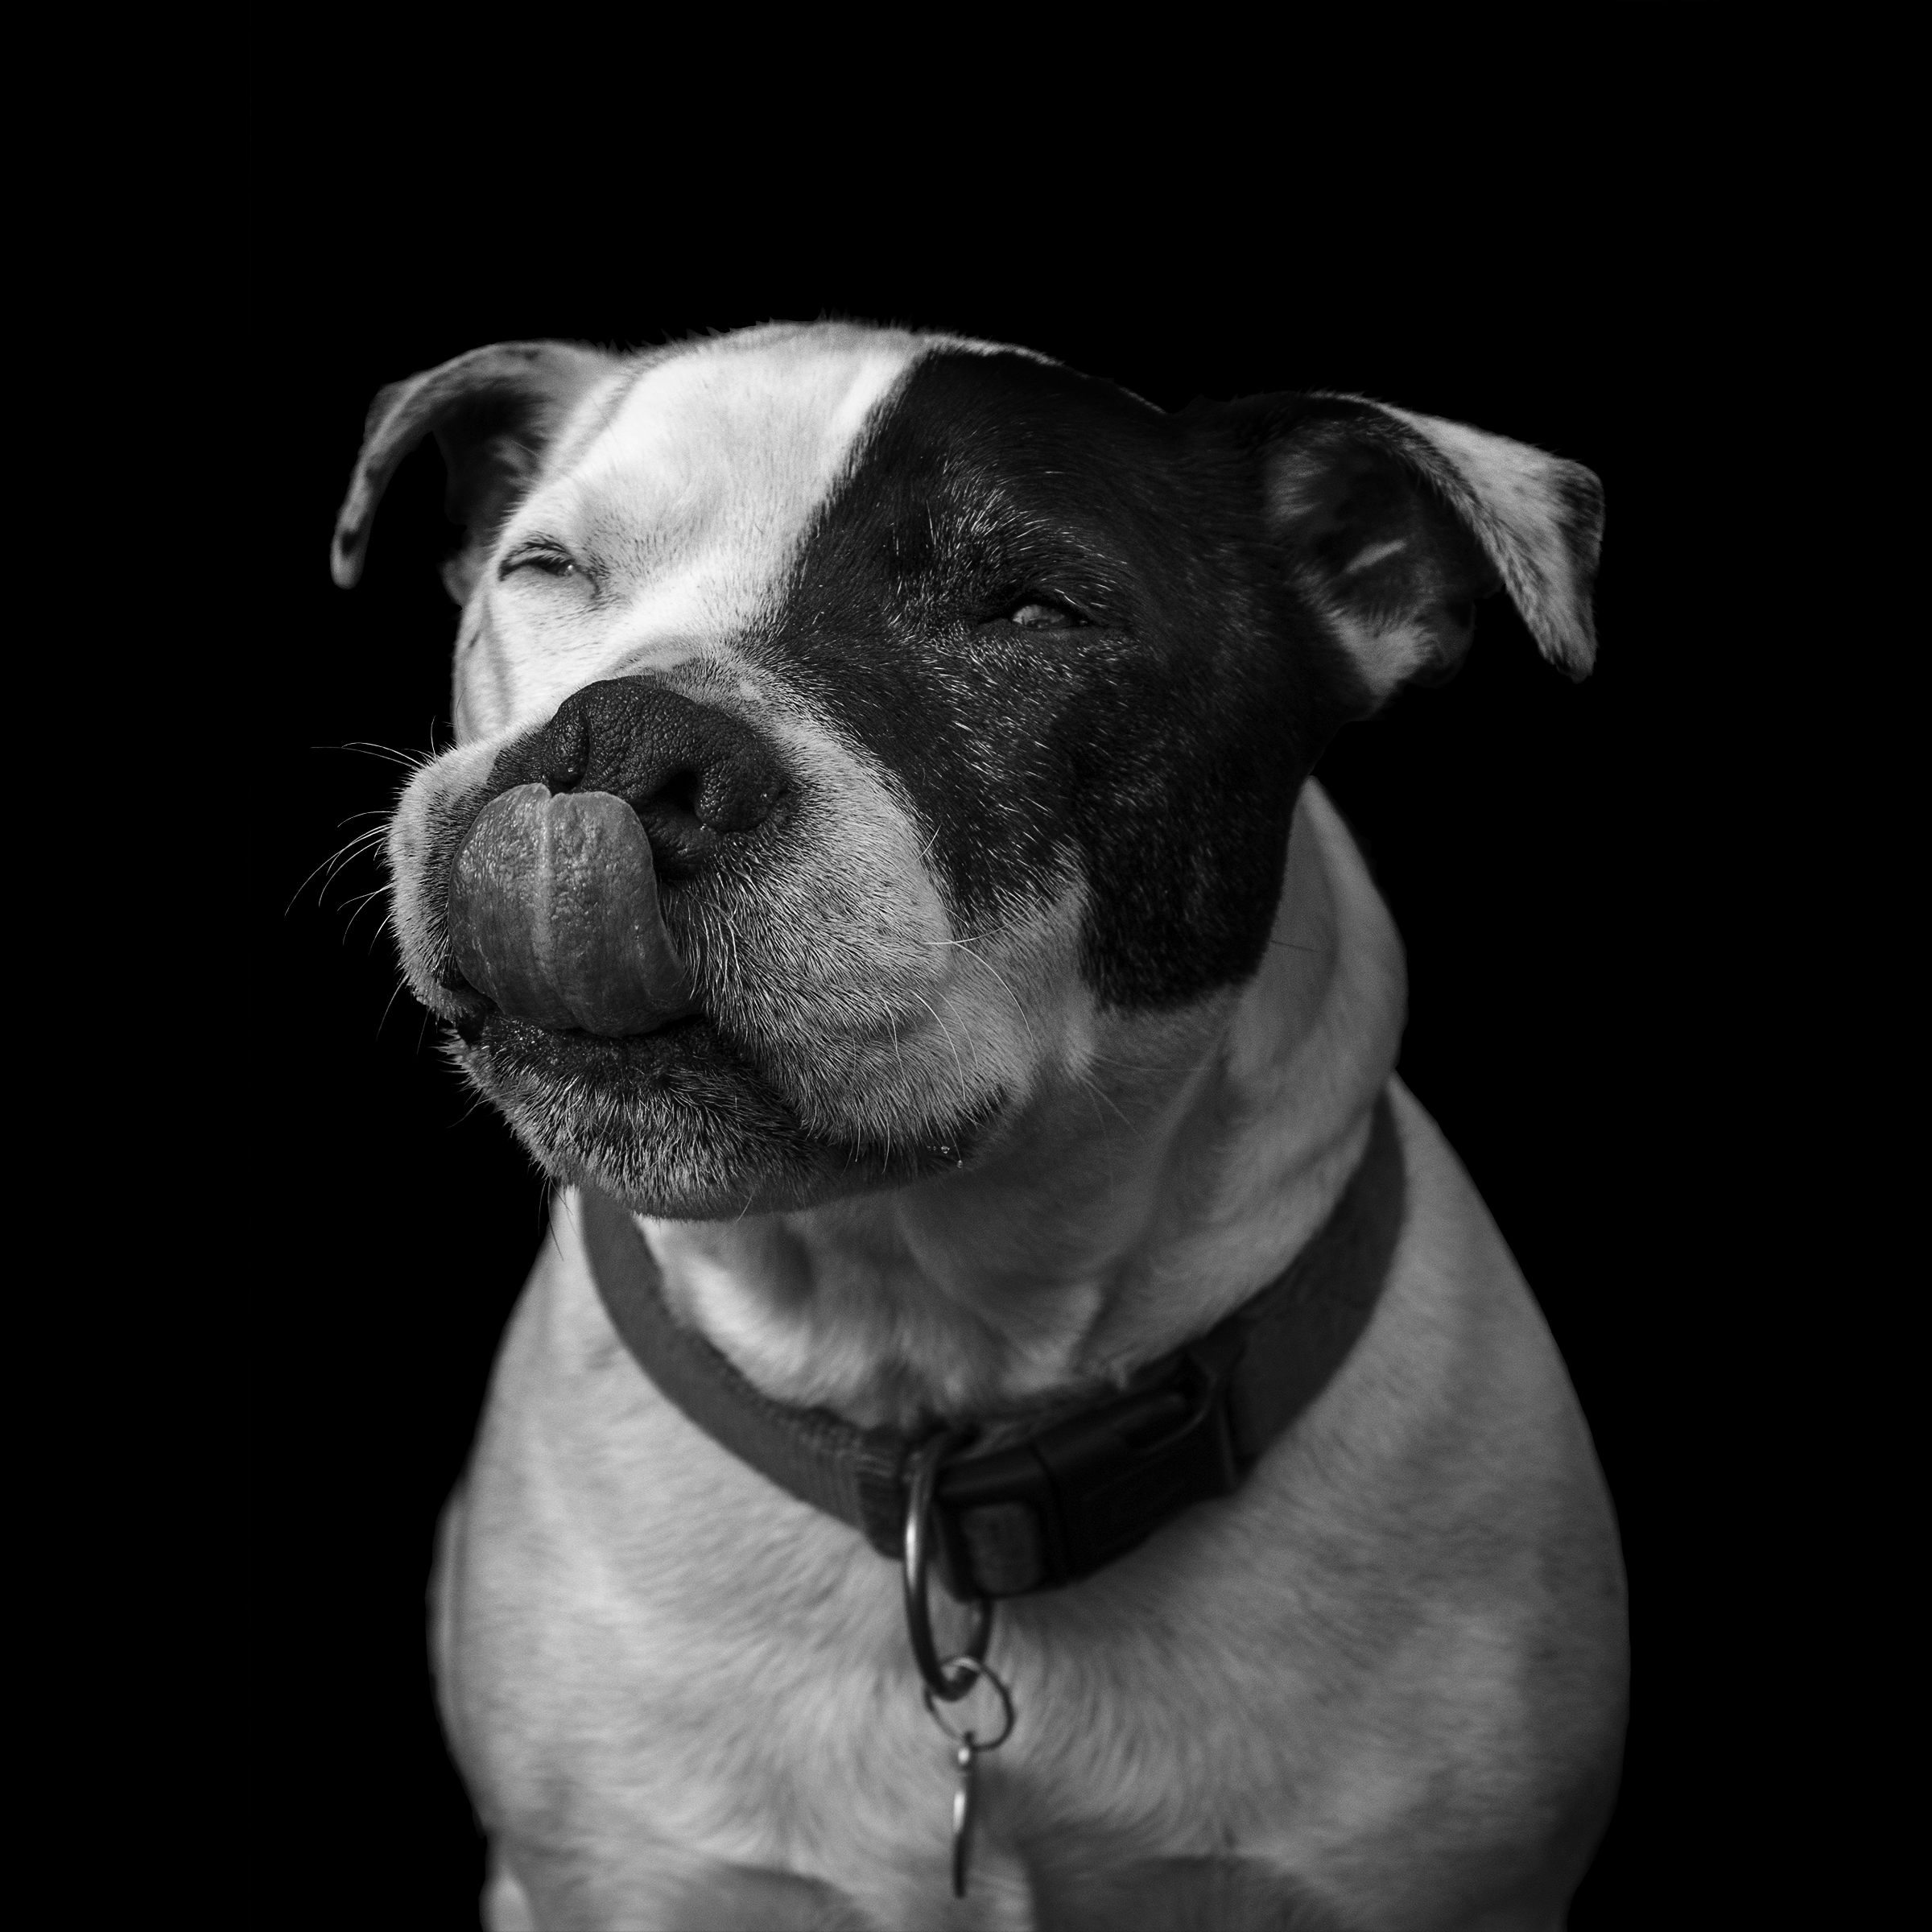 Monochrome photography of a dog by Tay Morgan.